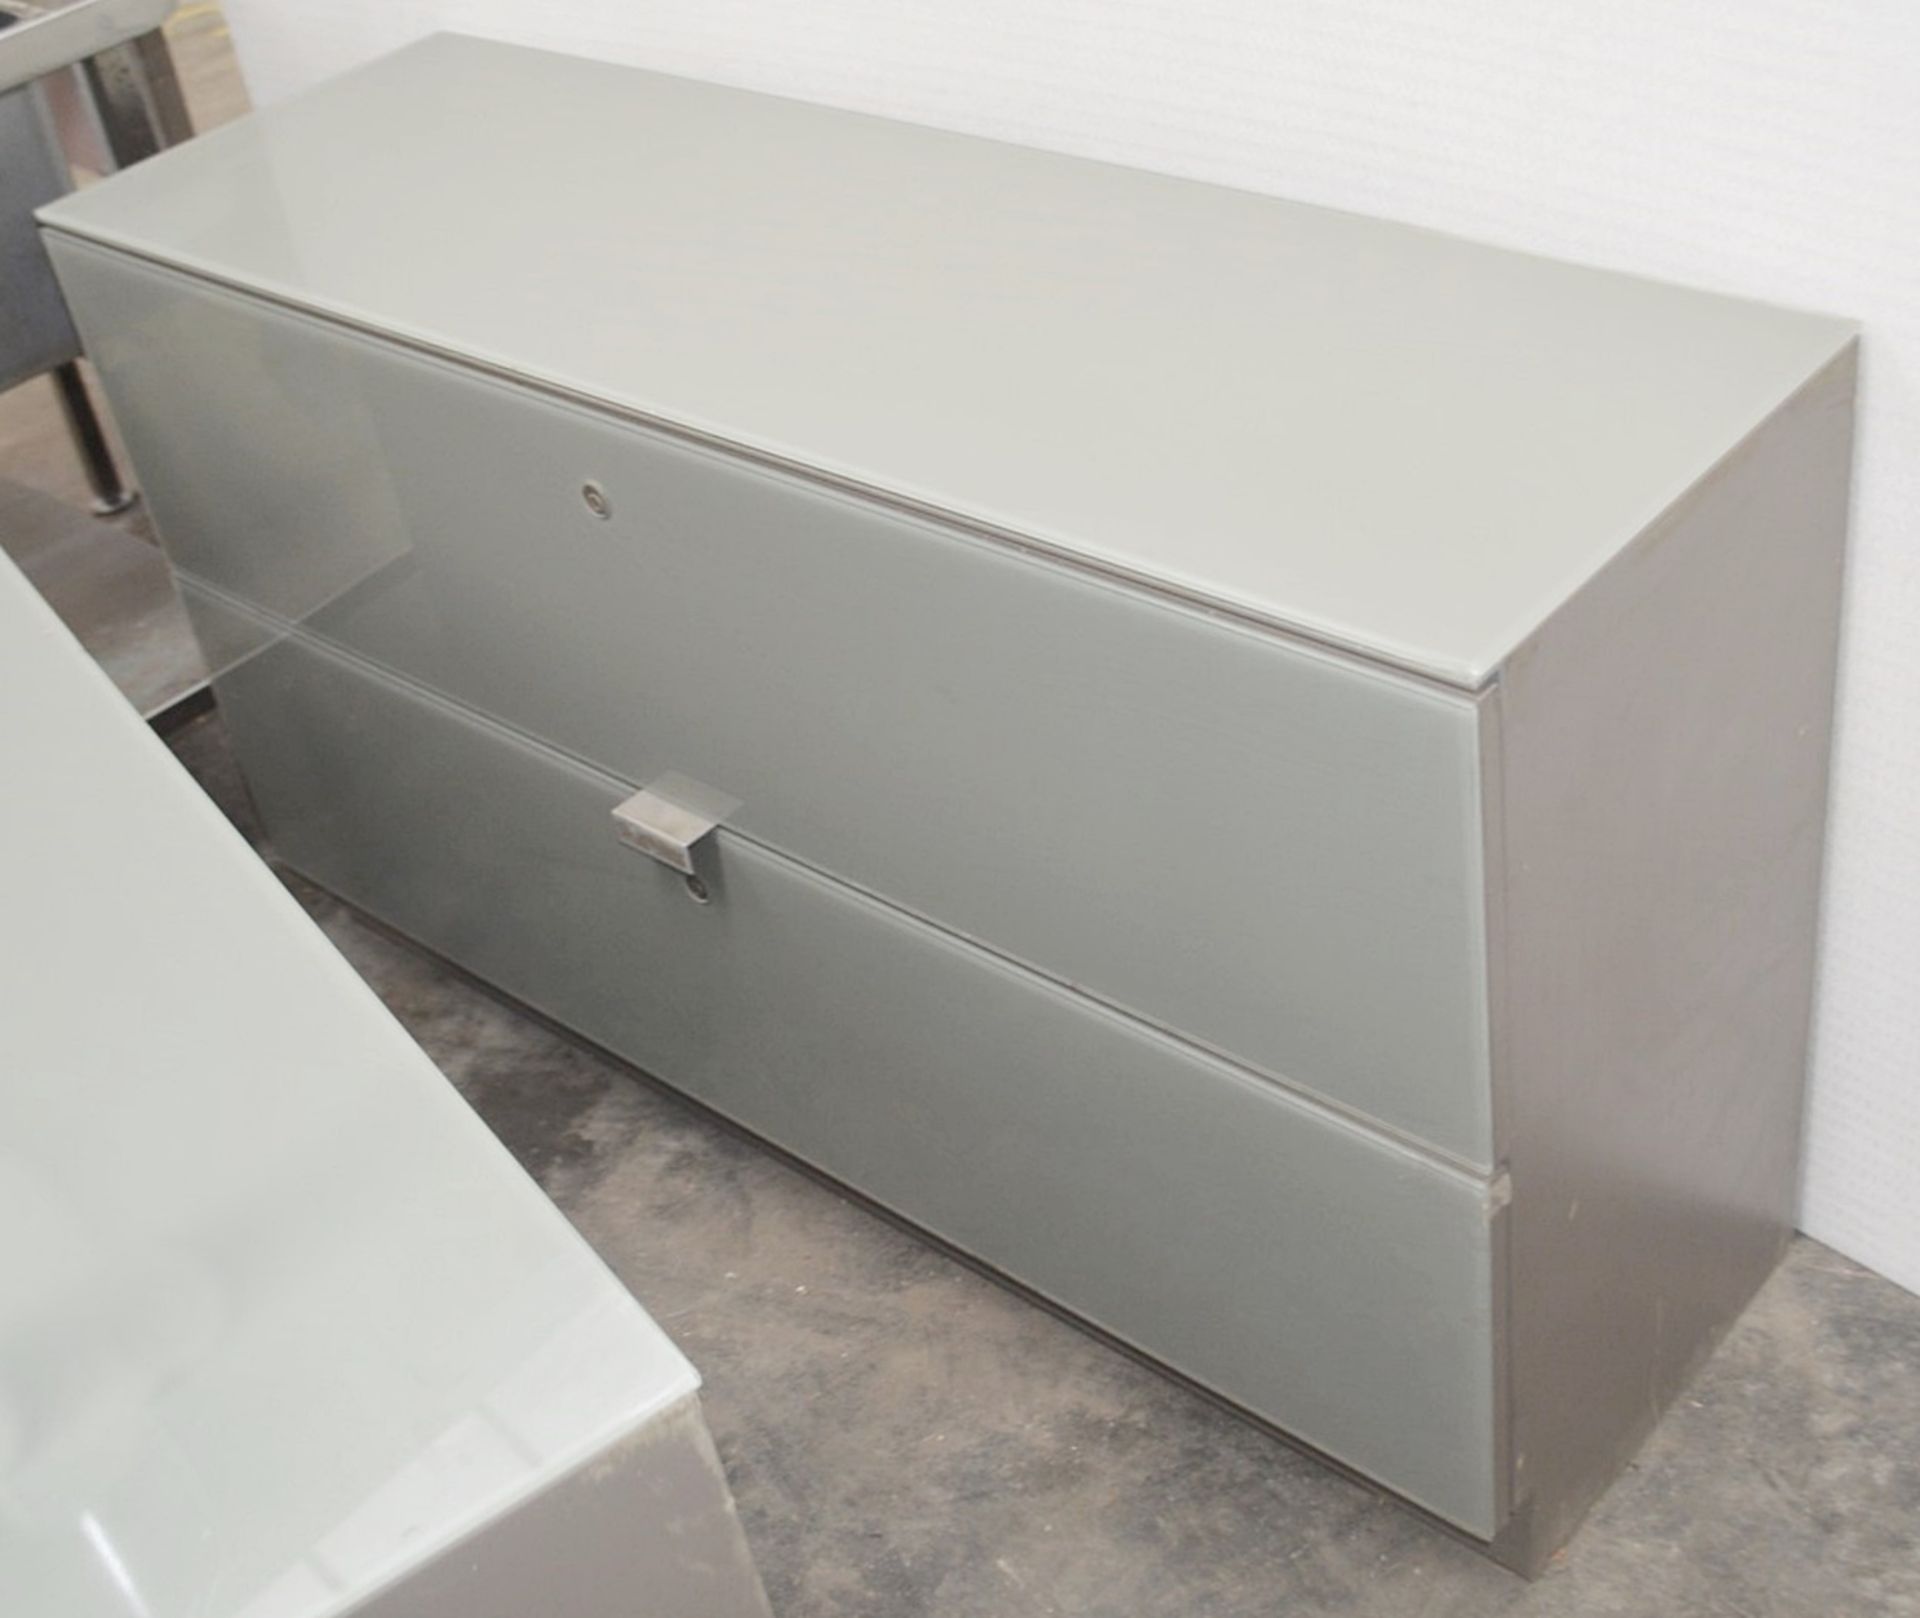 2 x Glass Topped / Fronted Lockable 2-Door Salon Storage Units In Grey - Read Description - Image 3 of 9